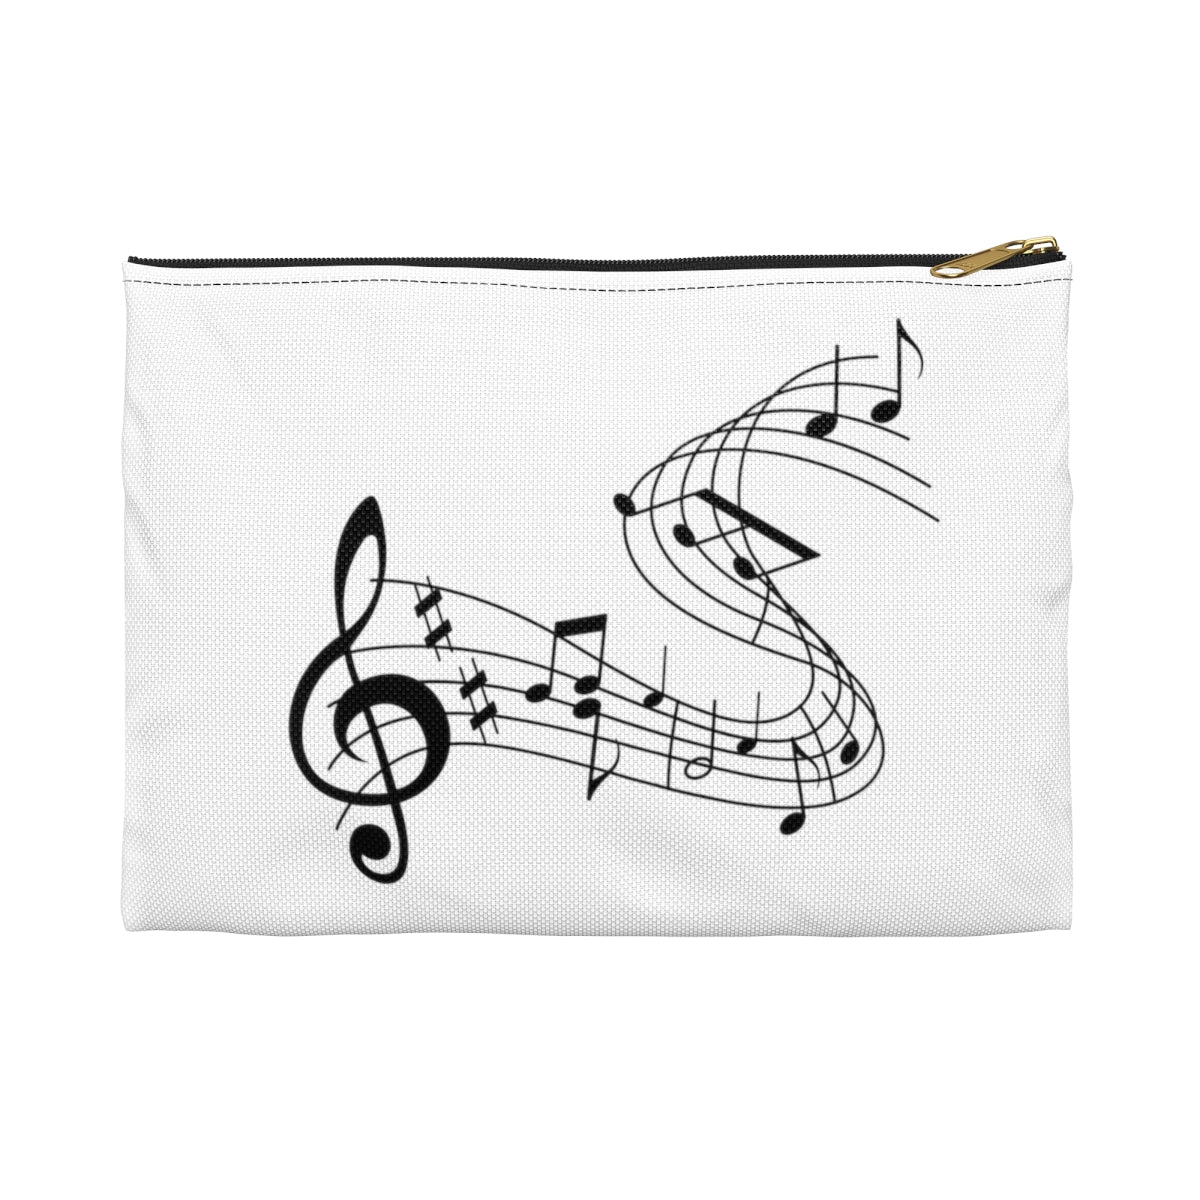 Music Notes Accessory Pouch Makeup Bag Pencil Case Cosmetic Bag Travel Bag